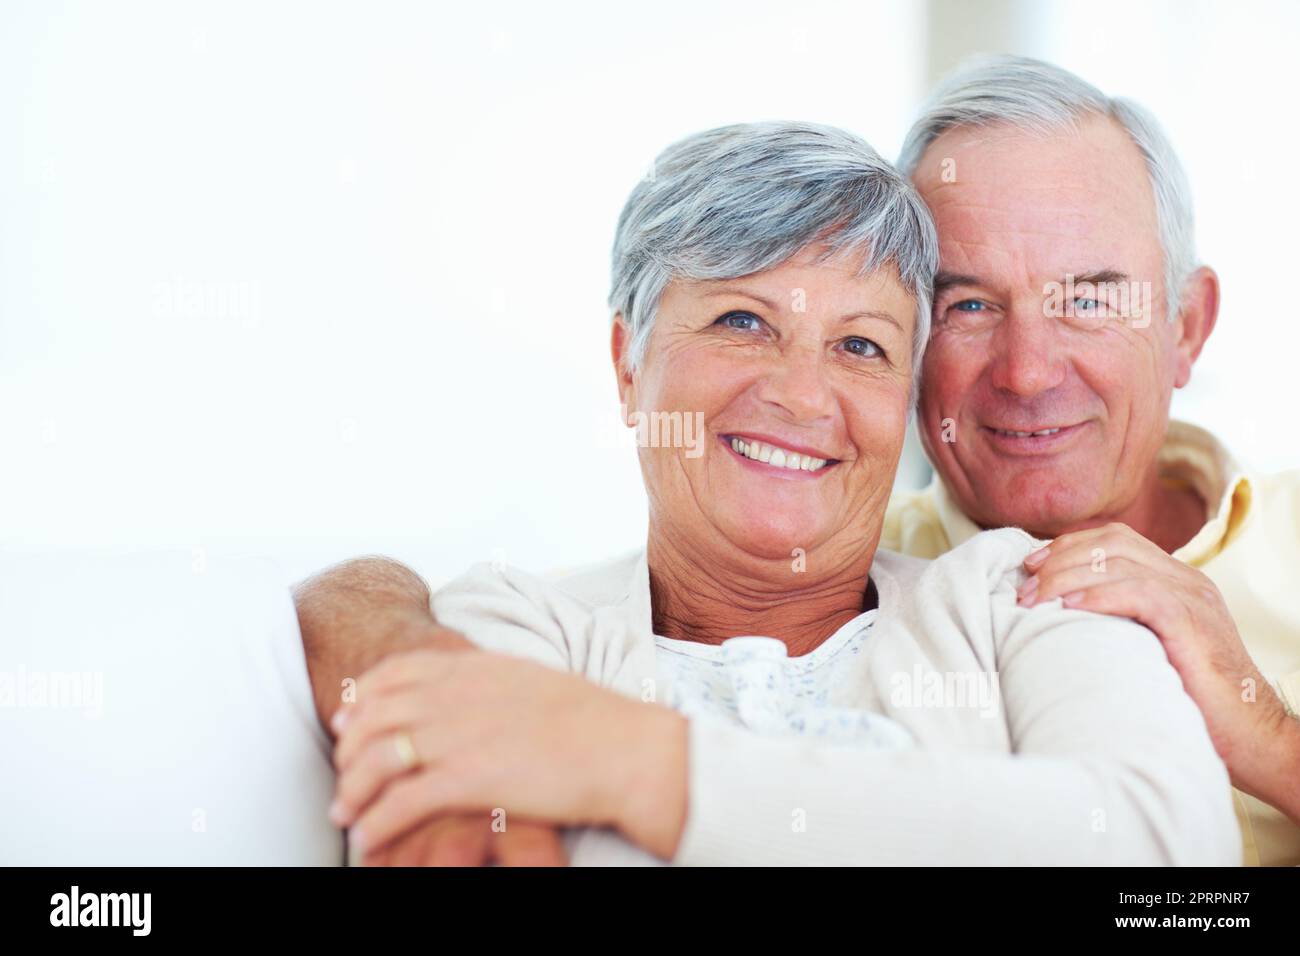 Sheer joy. Closeup of cheerful mature couple laughing together while sitting at home. Stock Photo